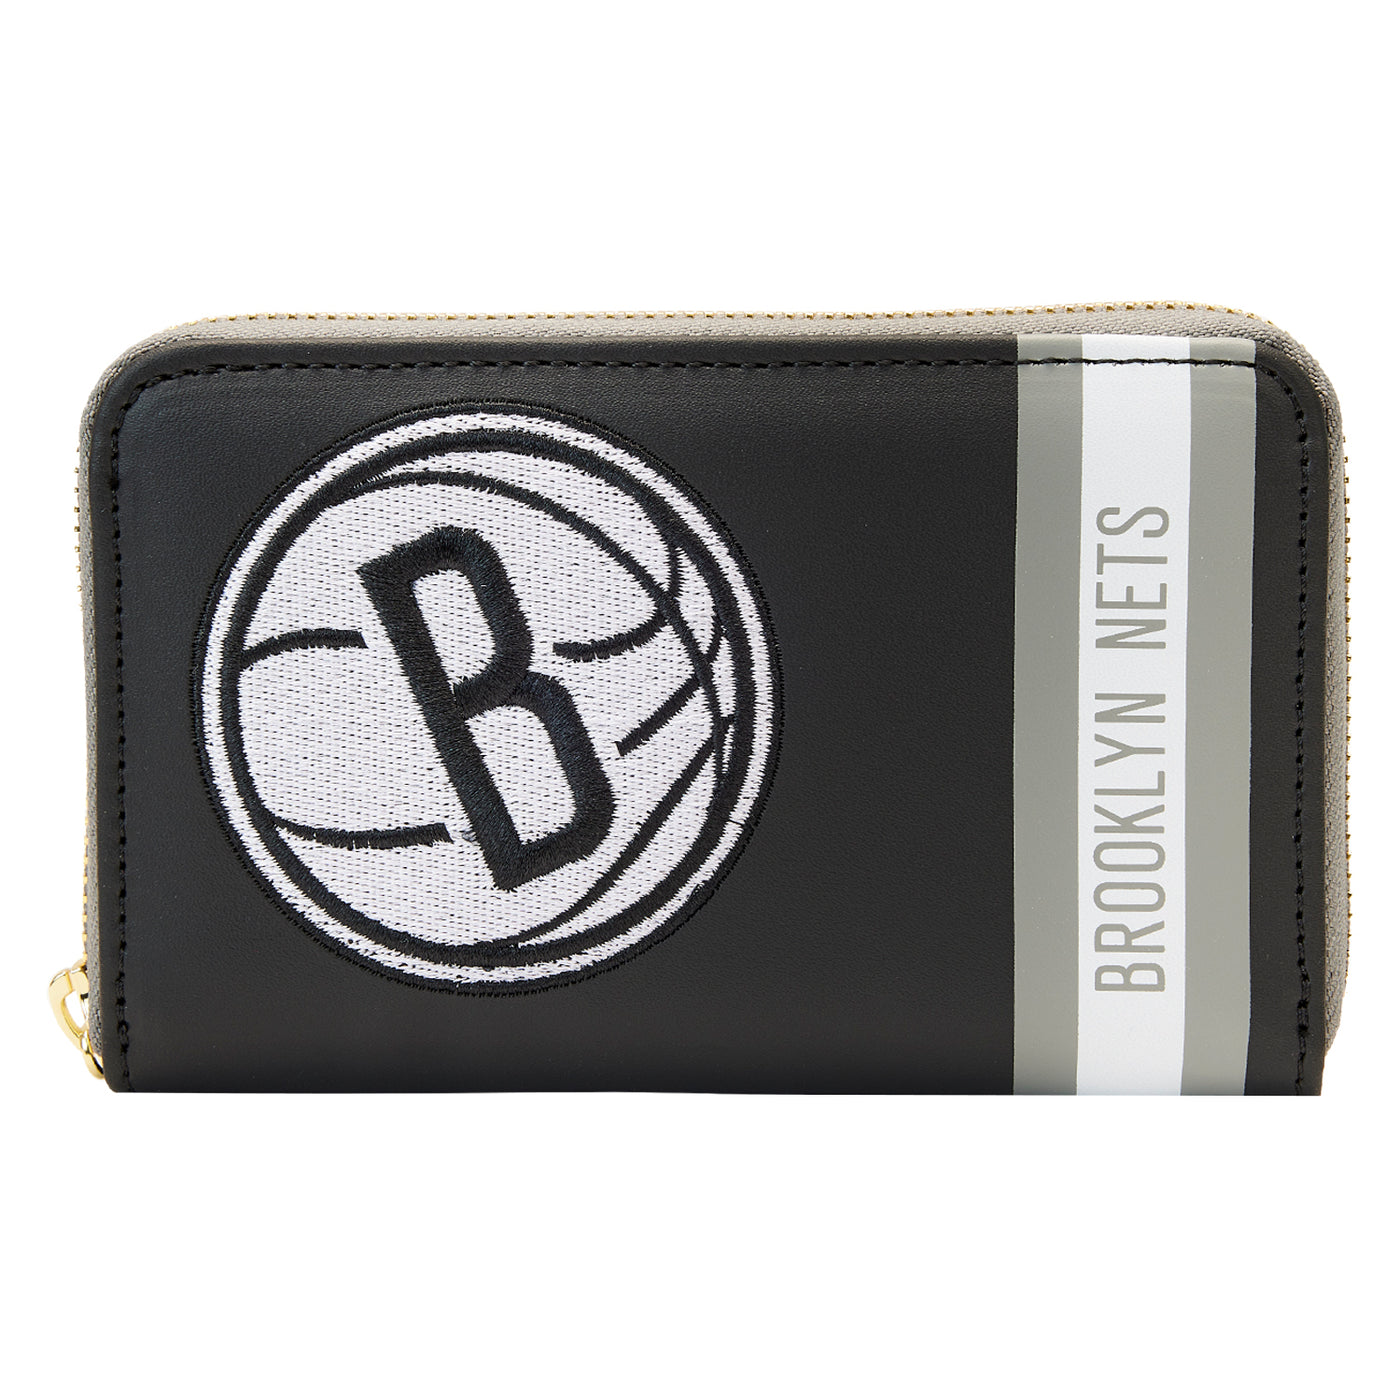 NBA Brooklyn Patch Icons Wallet